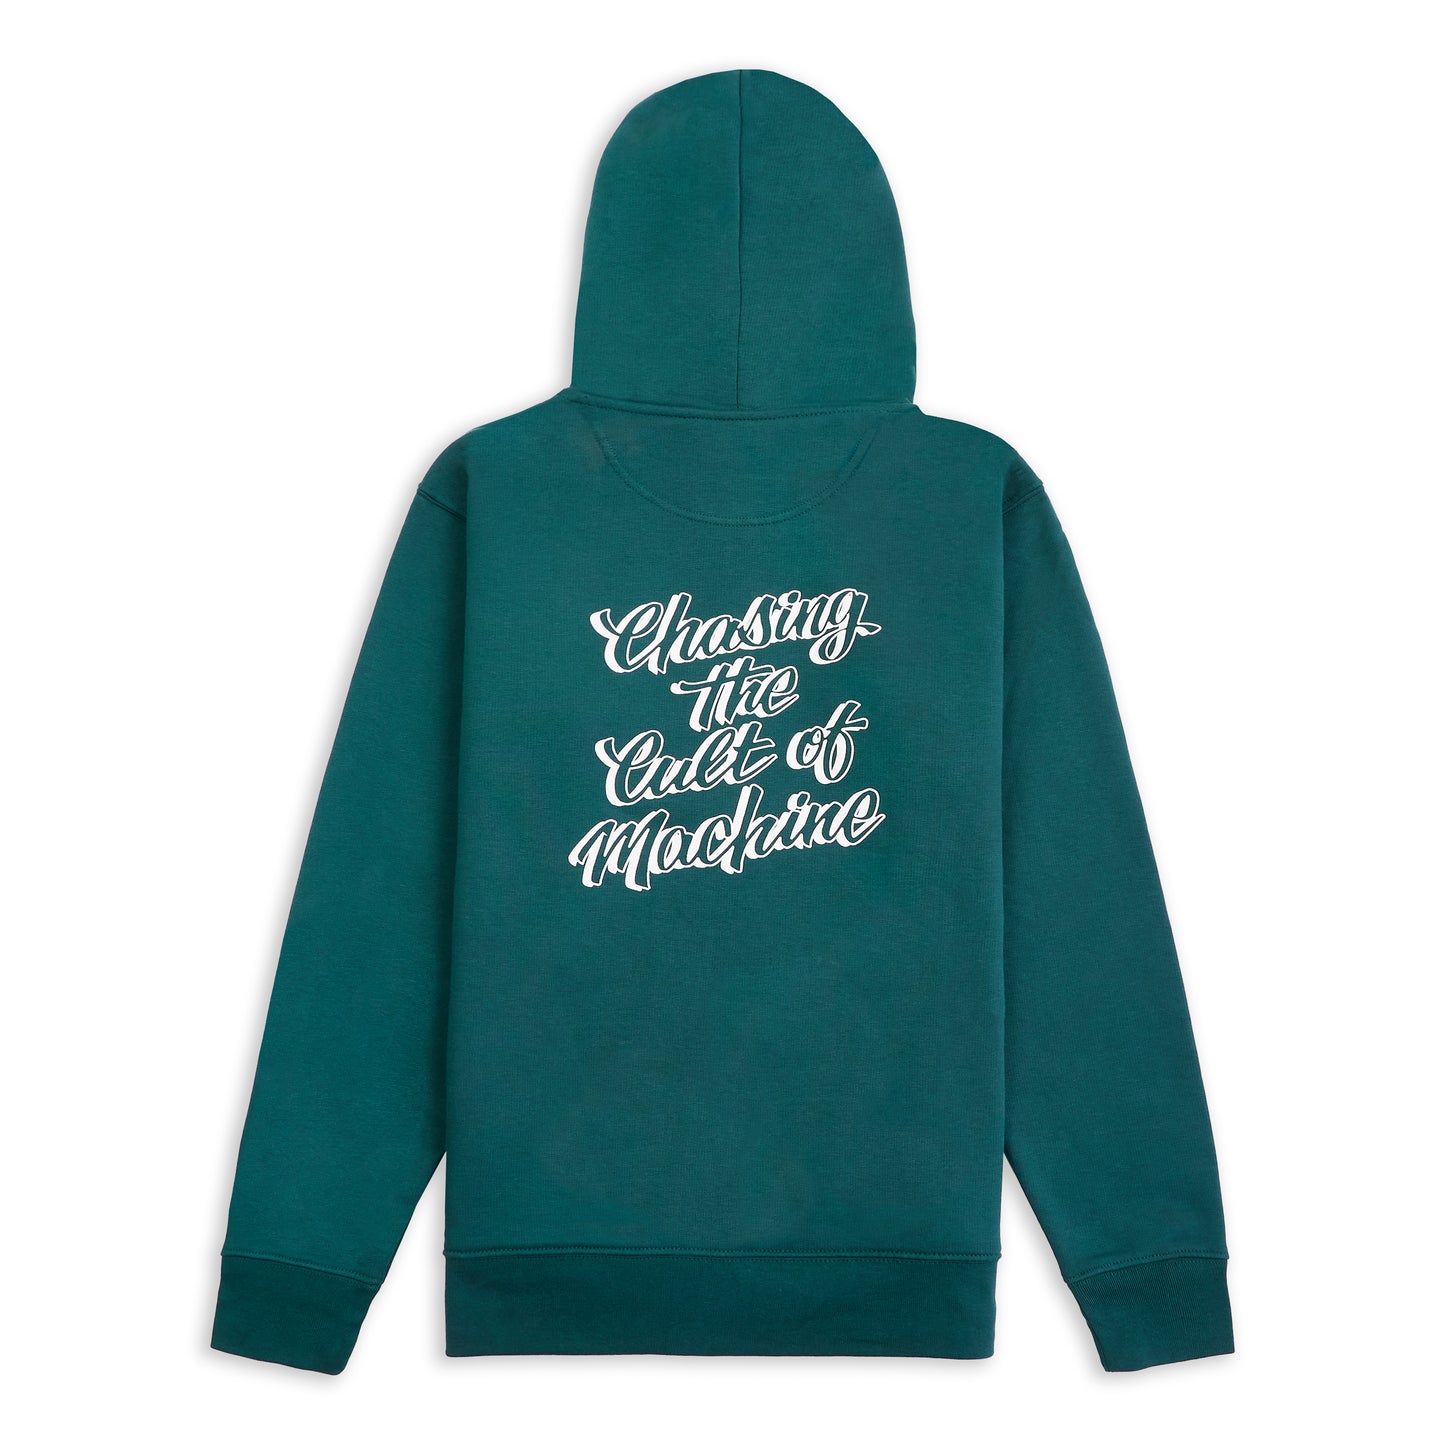 Chasing The Cult Of Machine. Zip up Hoody. Green